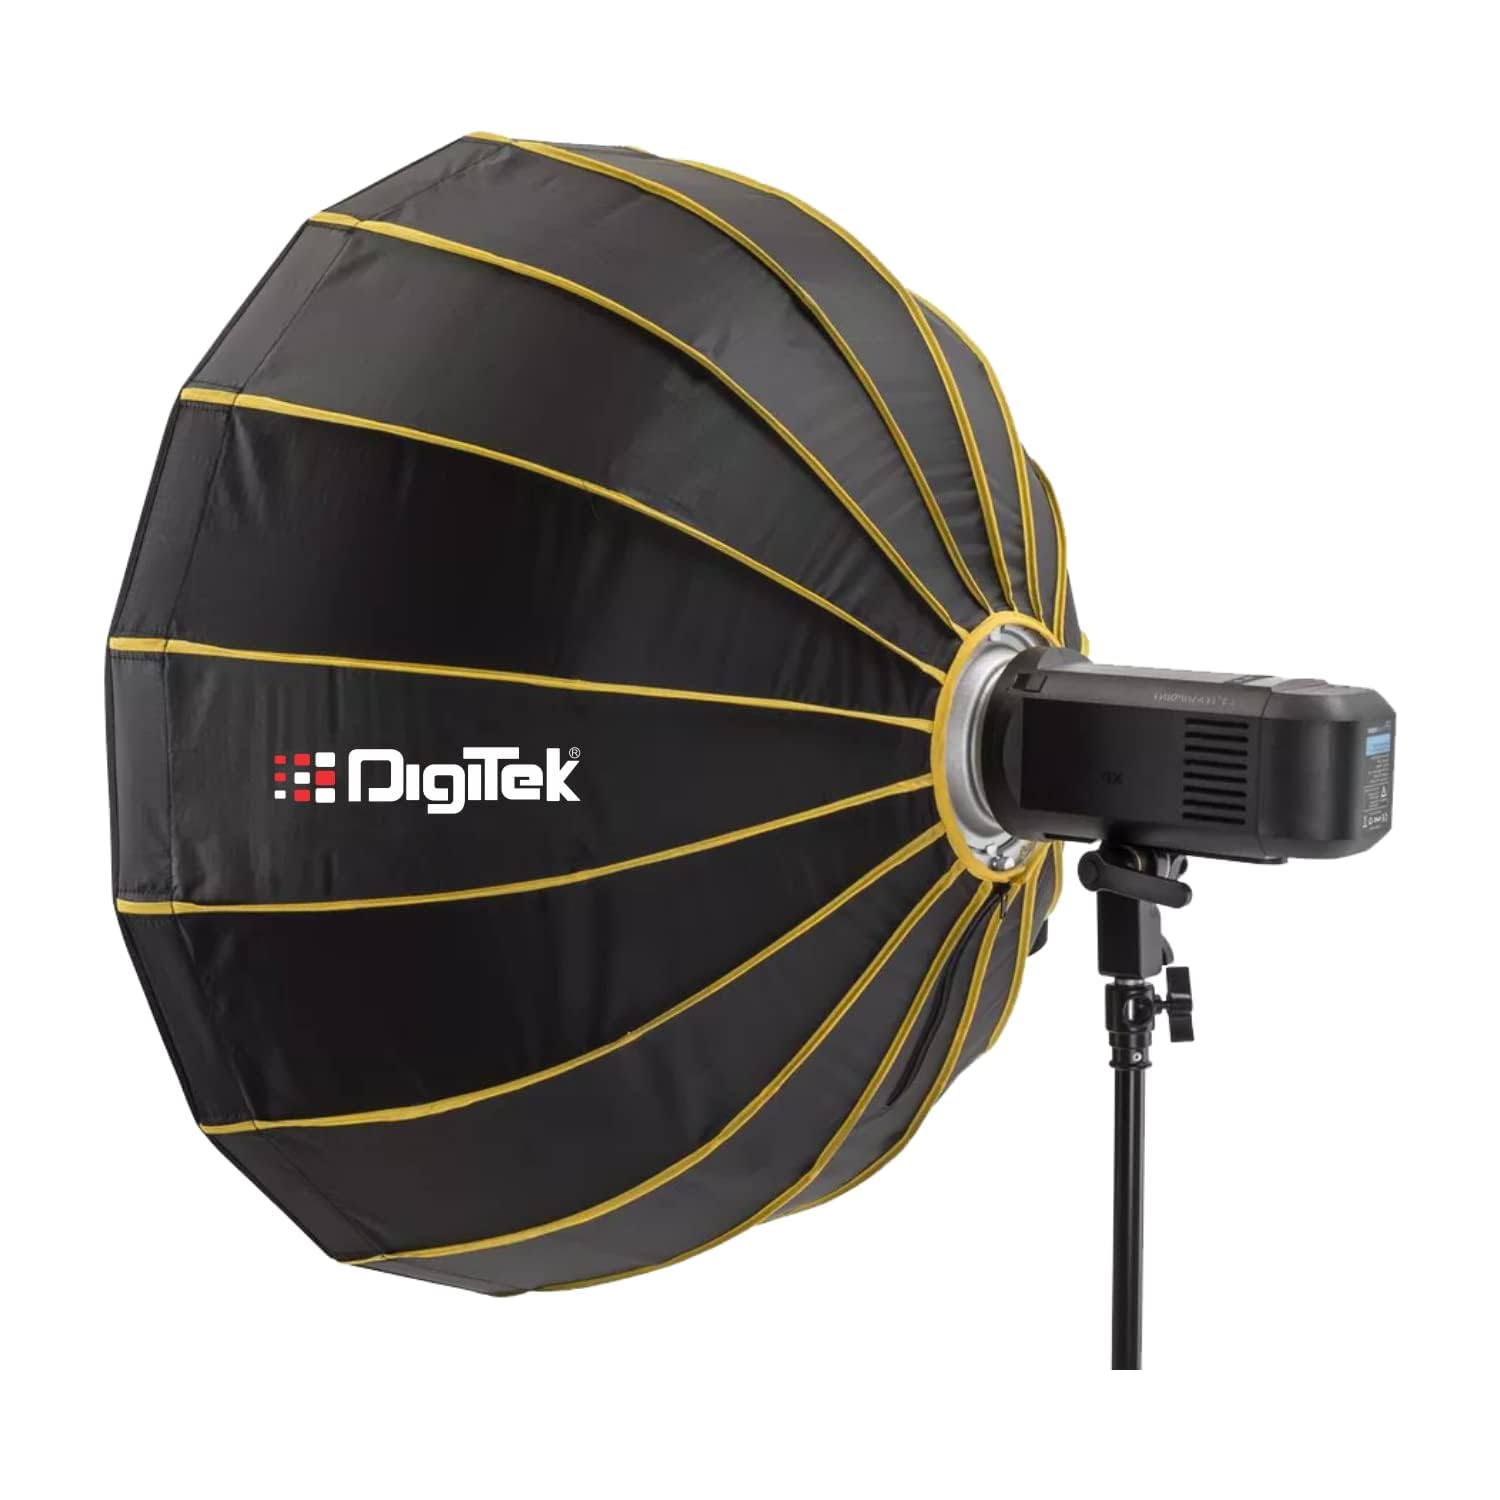 Digitek DBDS-85W 85cm Beauty Dish Softbox (White), Collapsible, Transportable, Lightweight Bowen Mount for Photography & Studio Lighting with Removable Diffuser